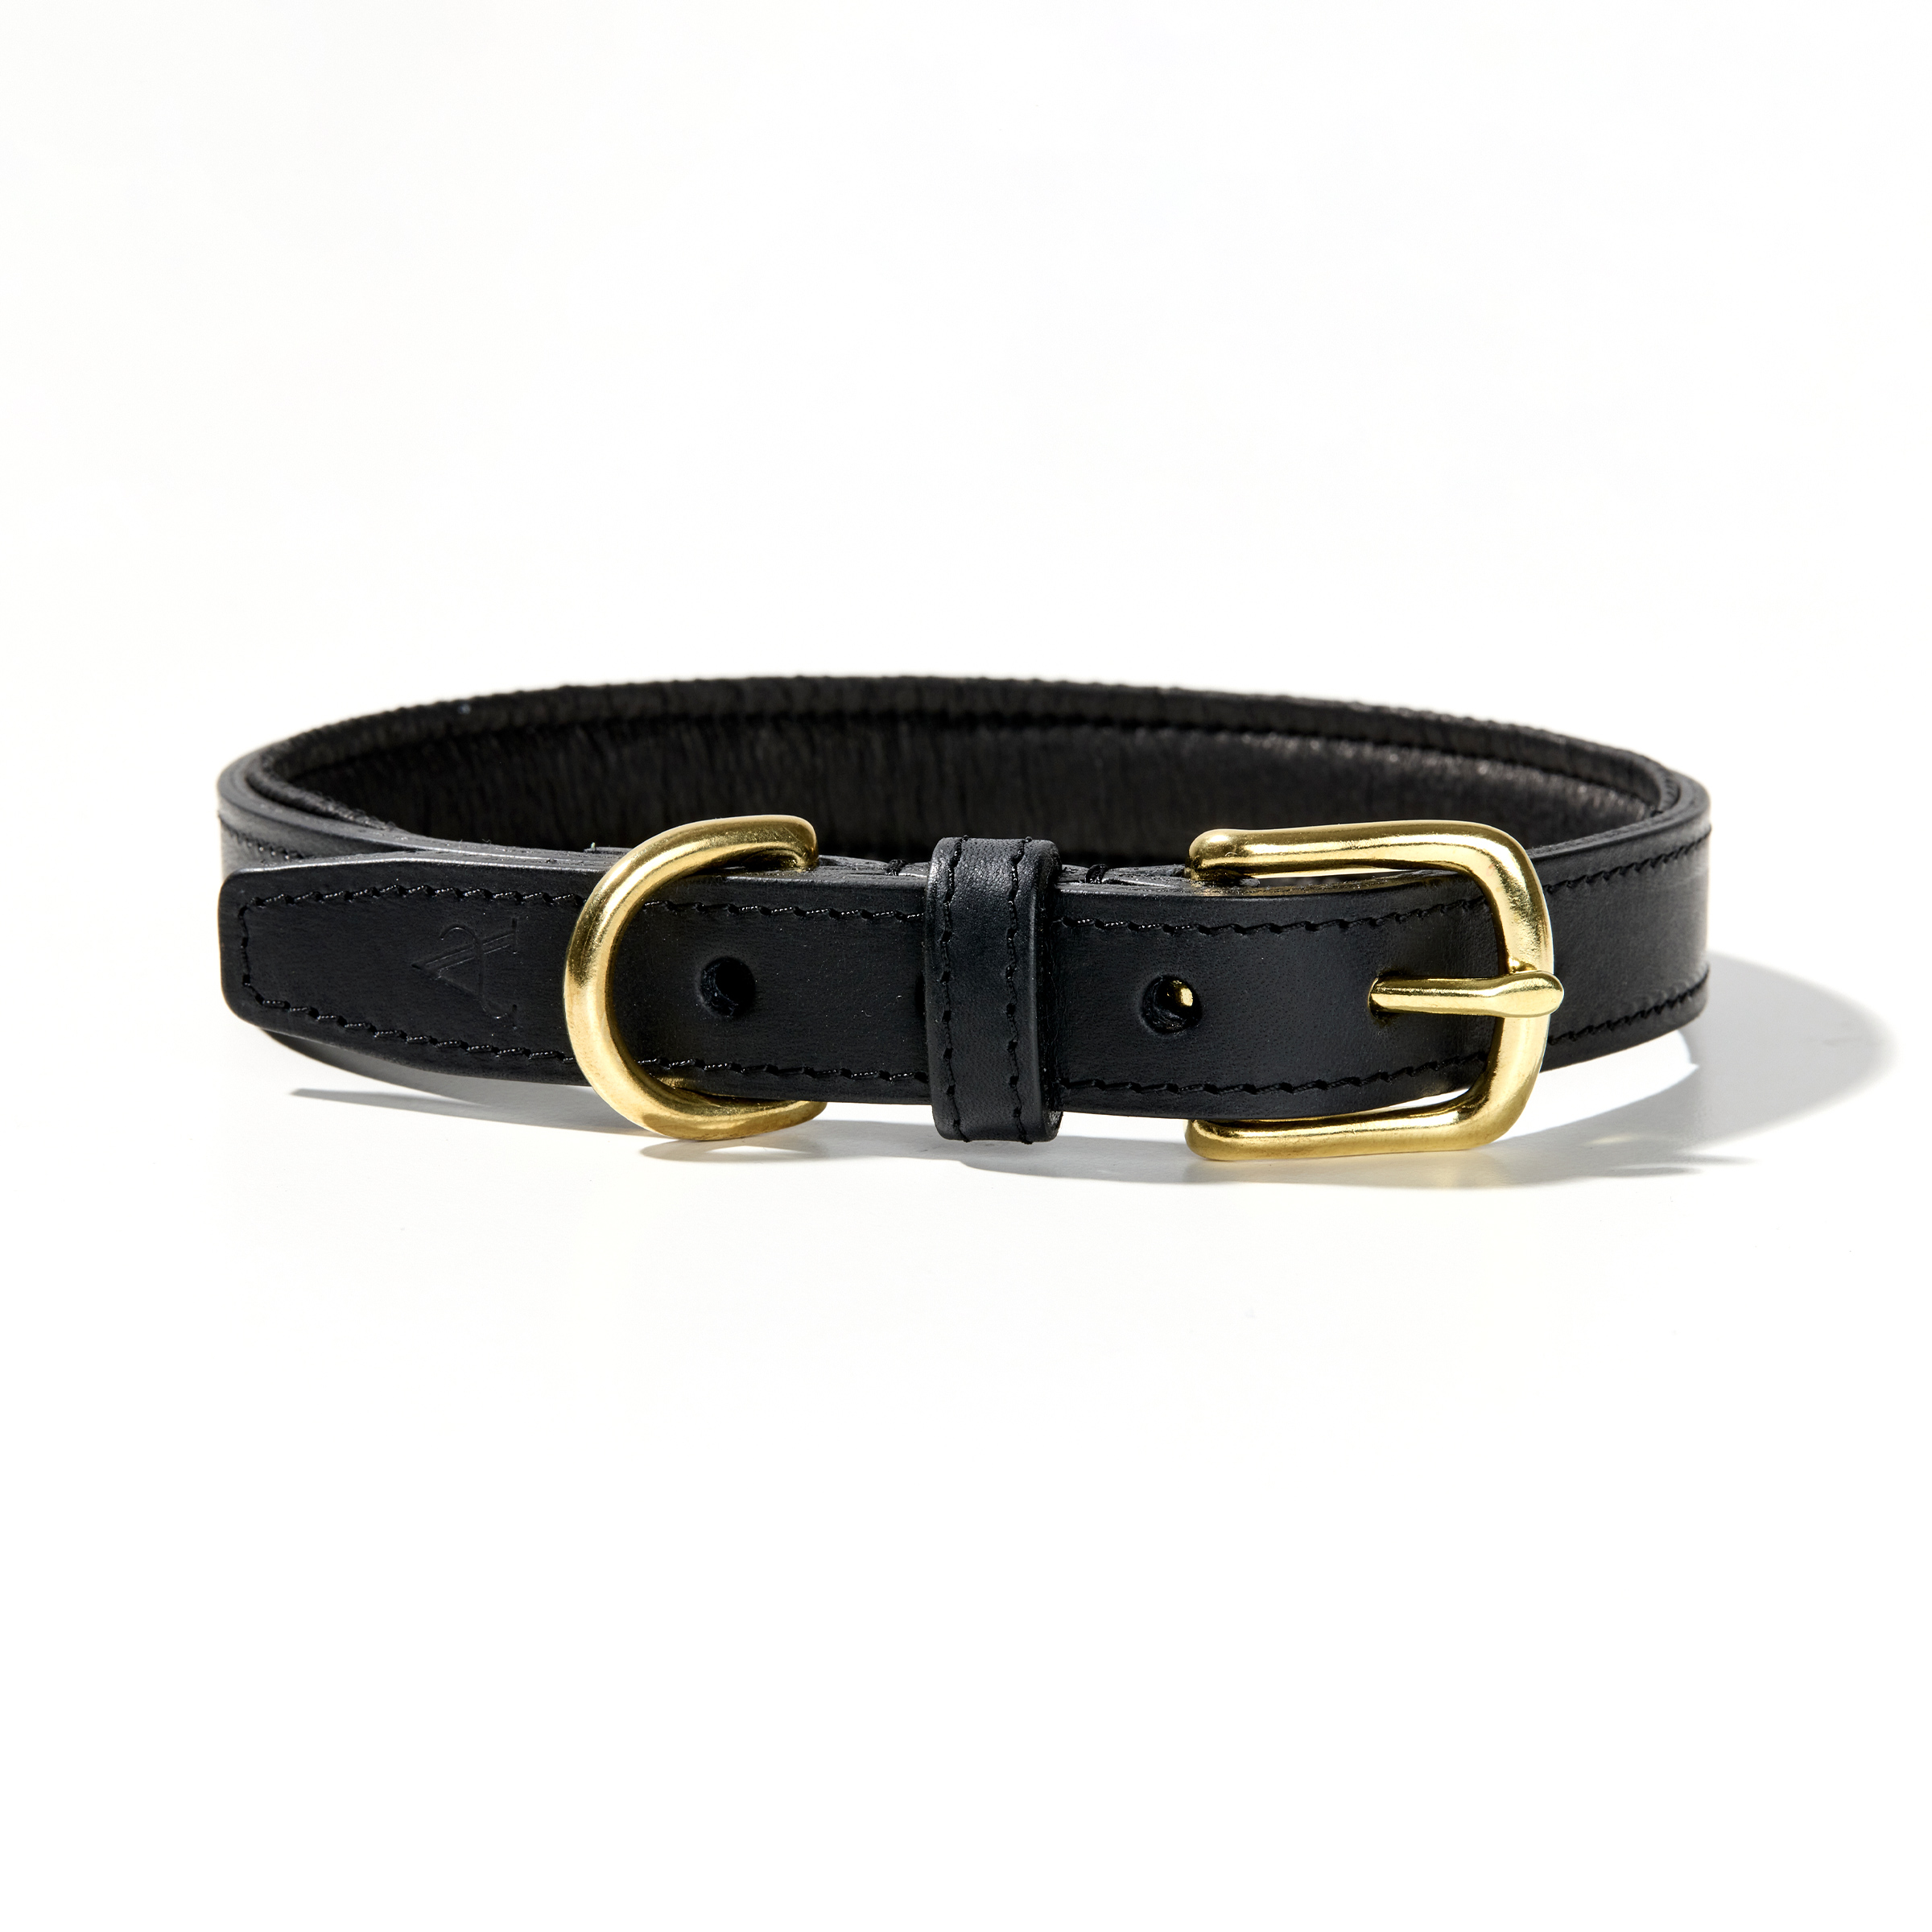 Padded Leather Dog Collar in Black